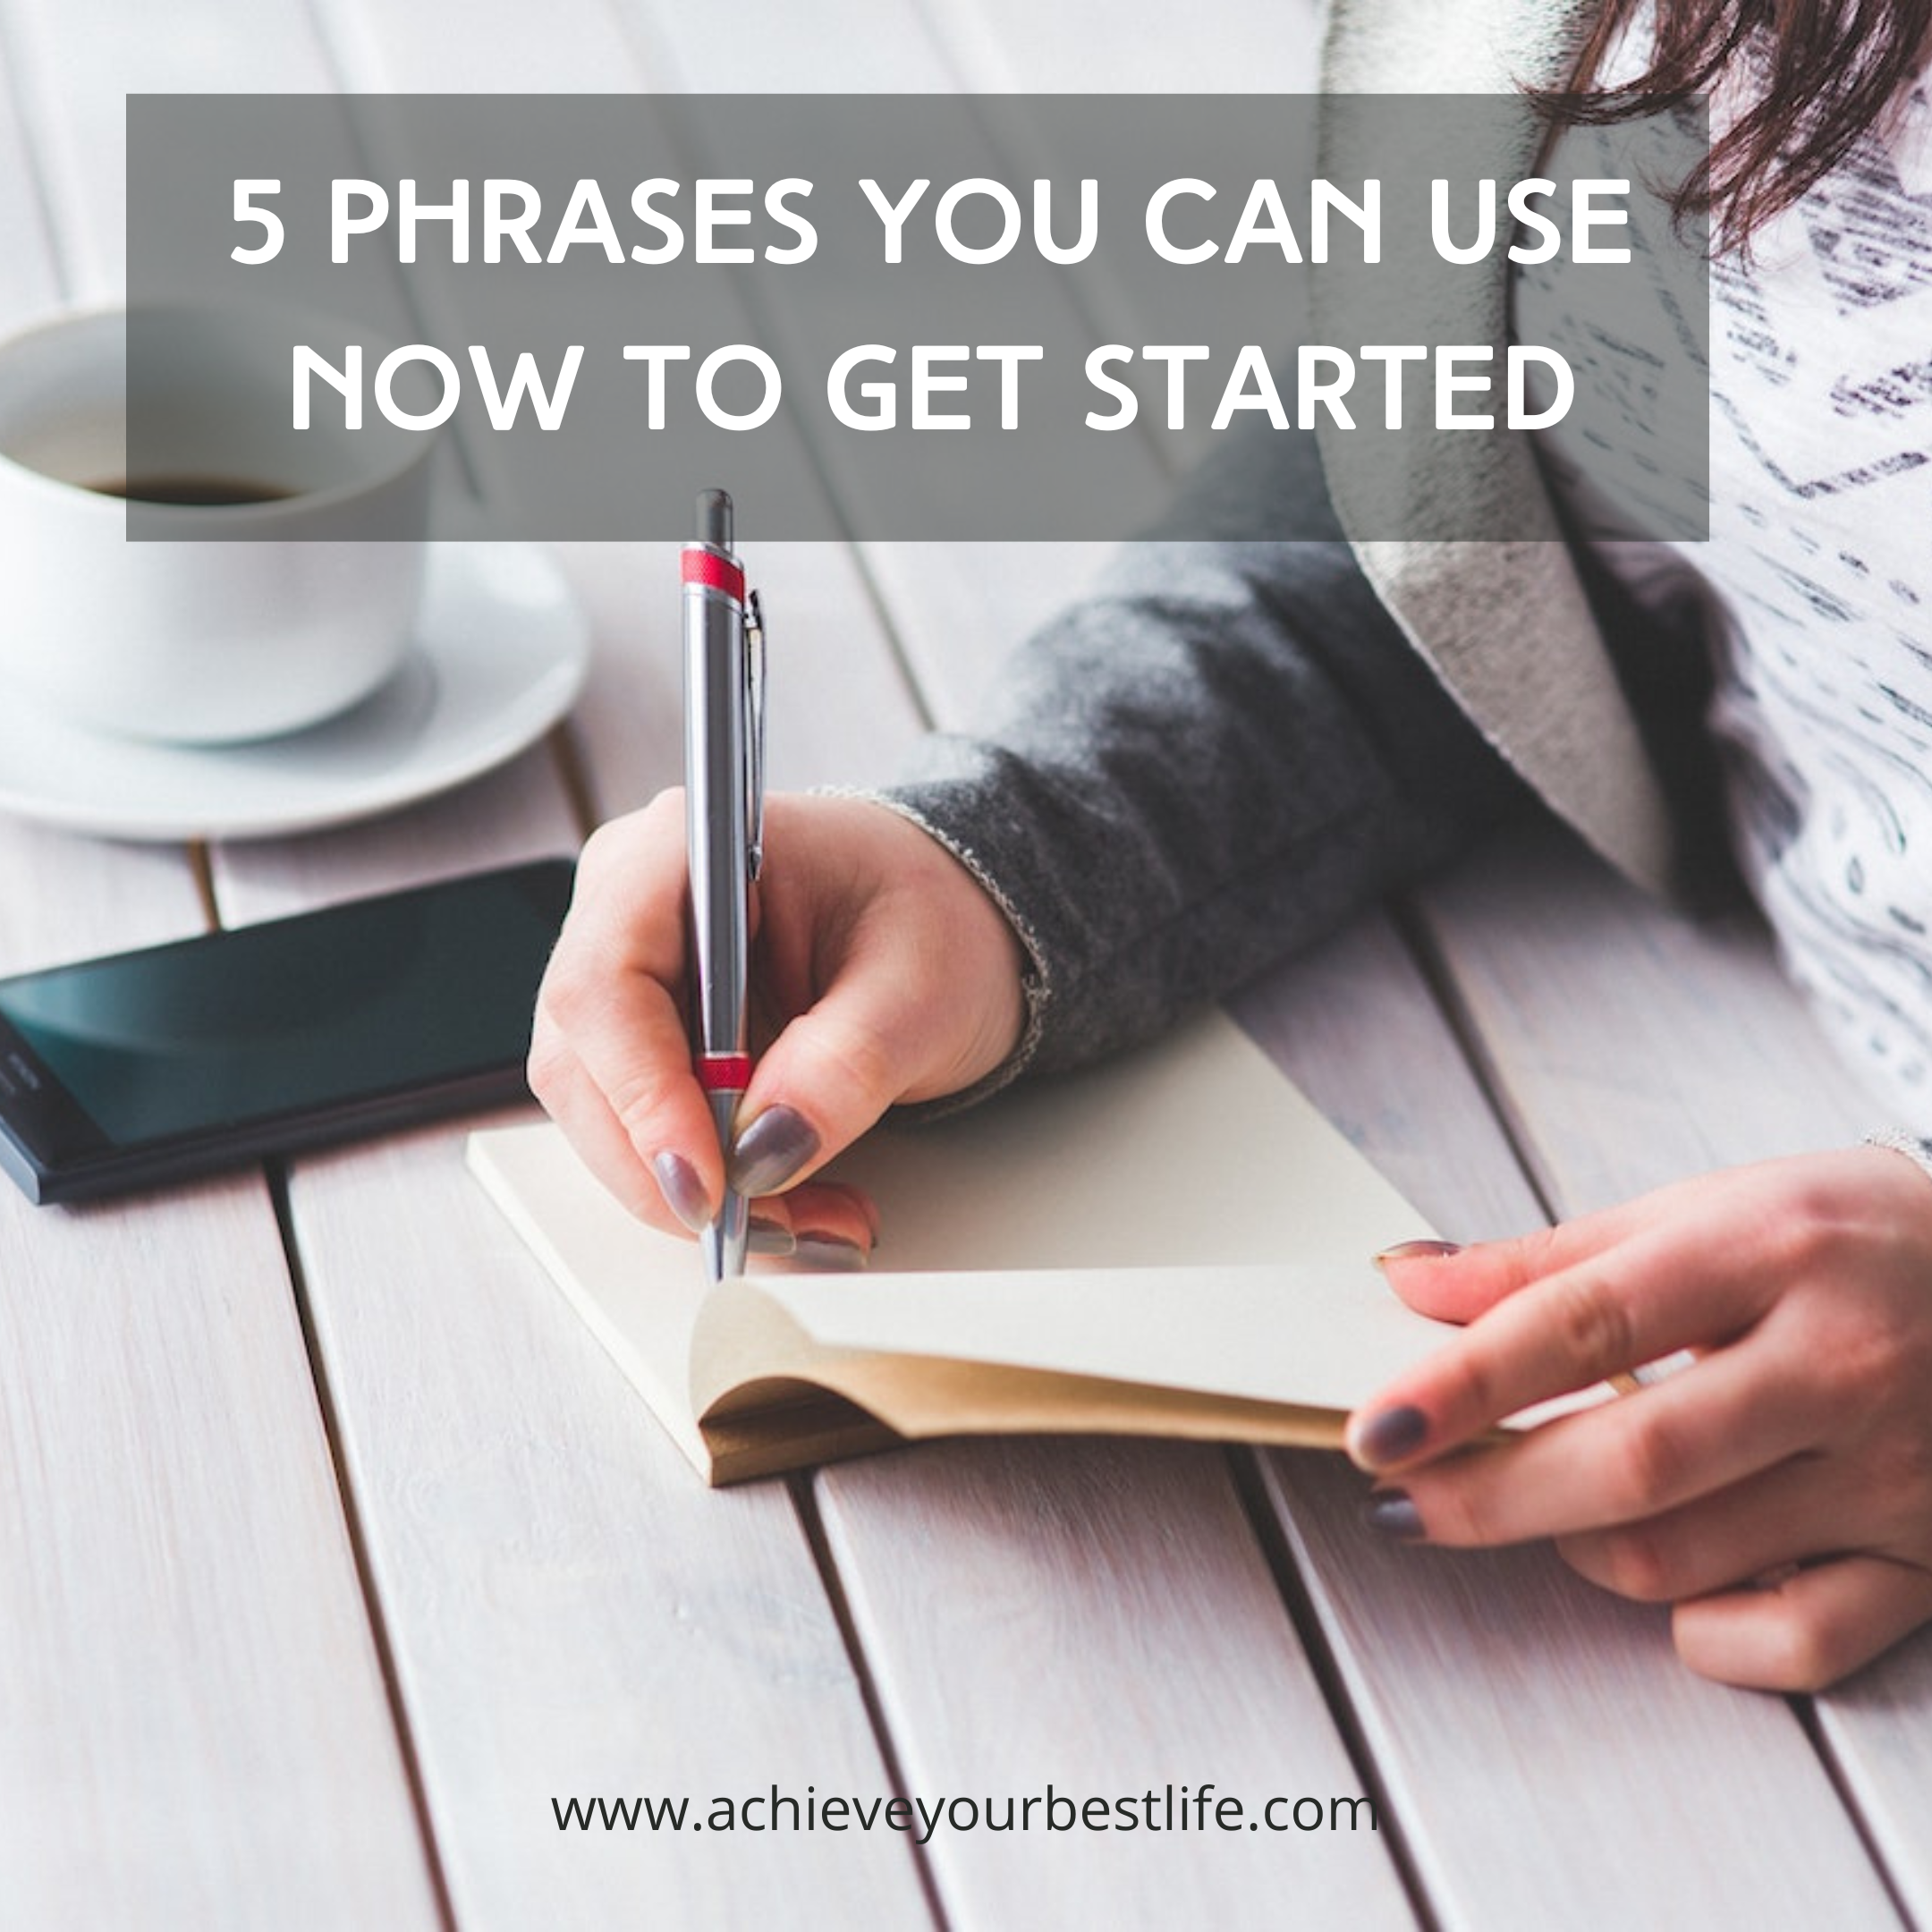 5 Phrase to Get Started